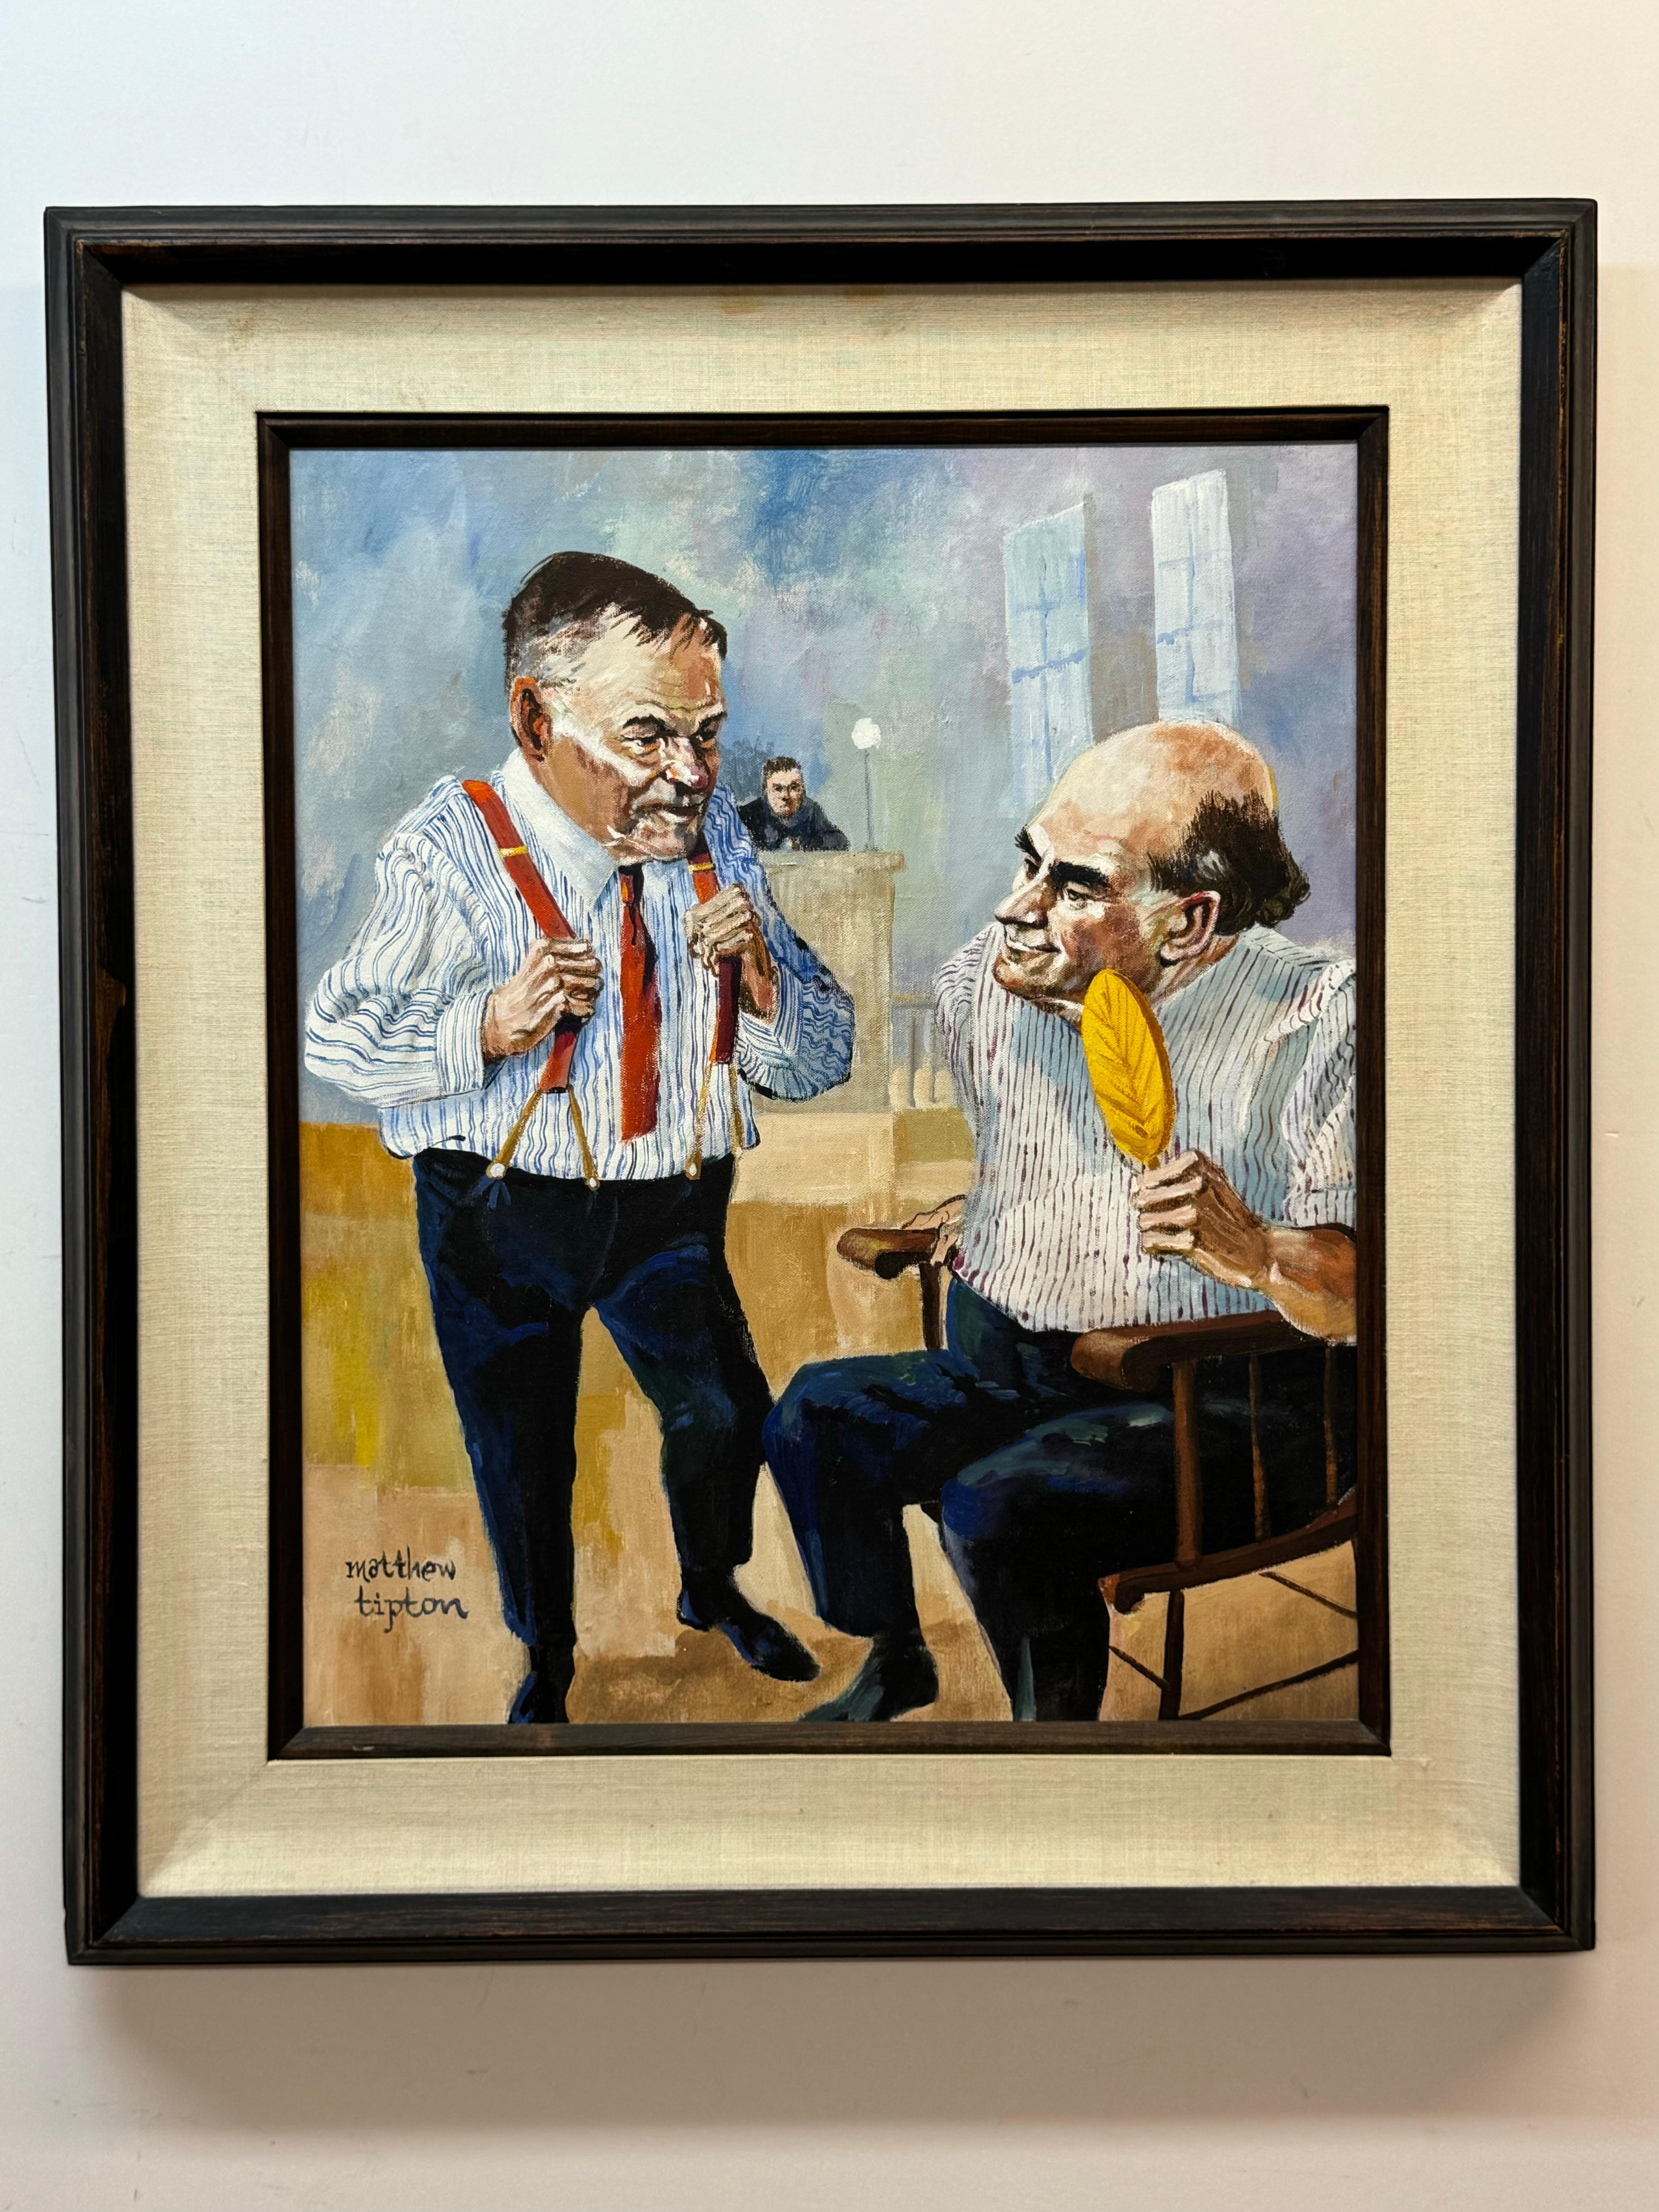 Matthew Tipton satirical illustration, painting depicting the controversial, 1925 Scopes trial. Lawyers Clarance Darrow and WM Jennings Bryan. Oil on canvas. 20 x 24 on framed 28.25 x 32.25 framed.